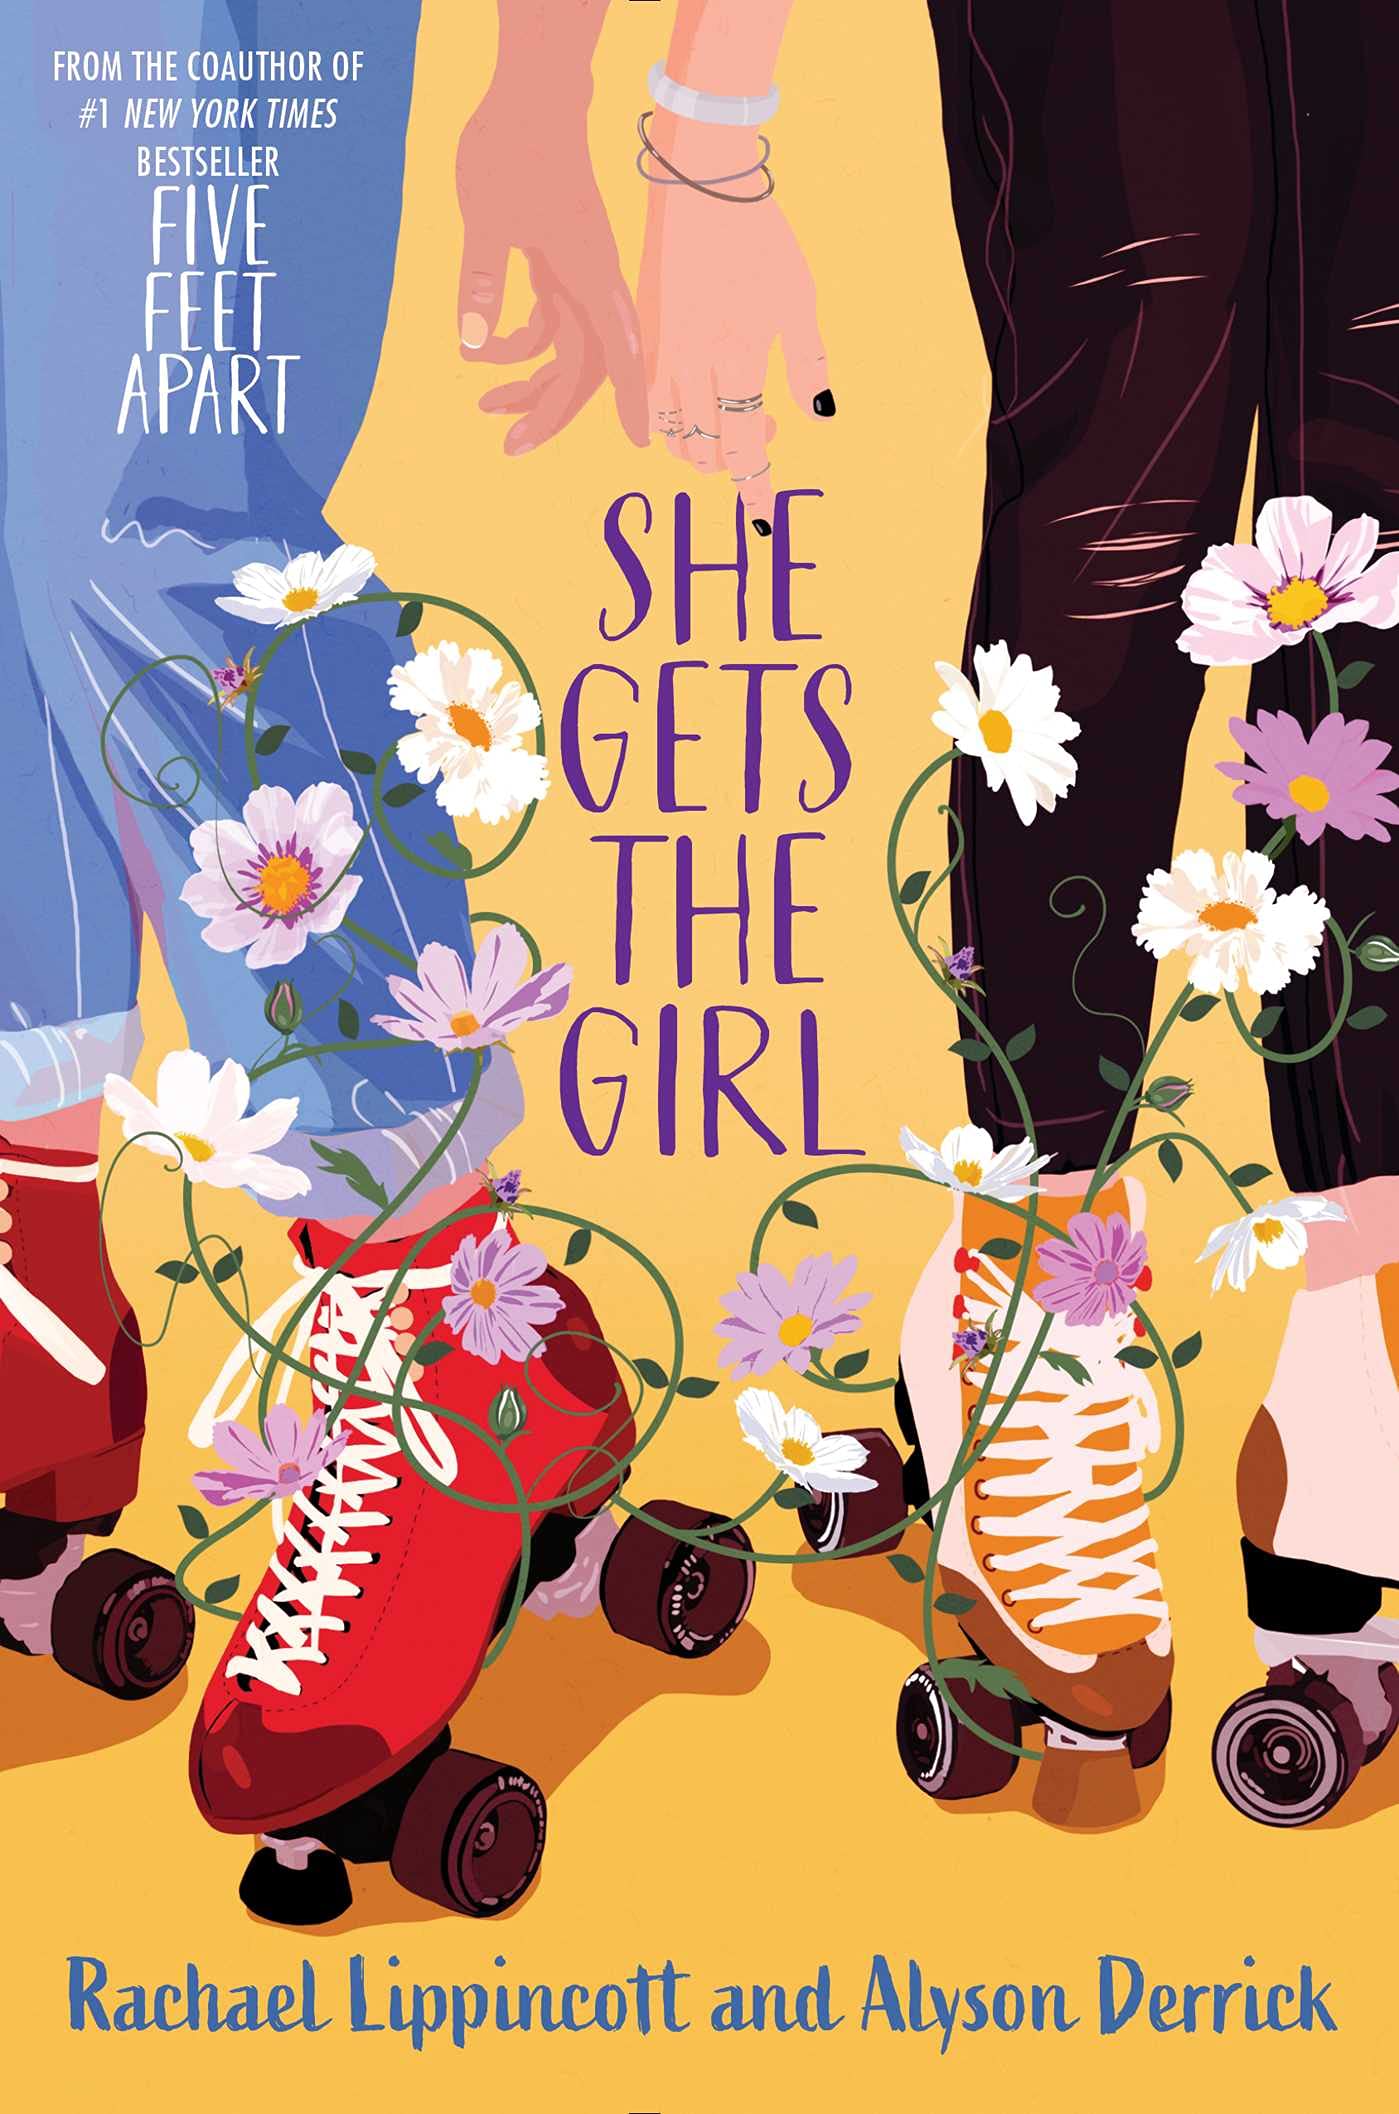 Image of Cover "She Gets the Girl"